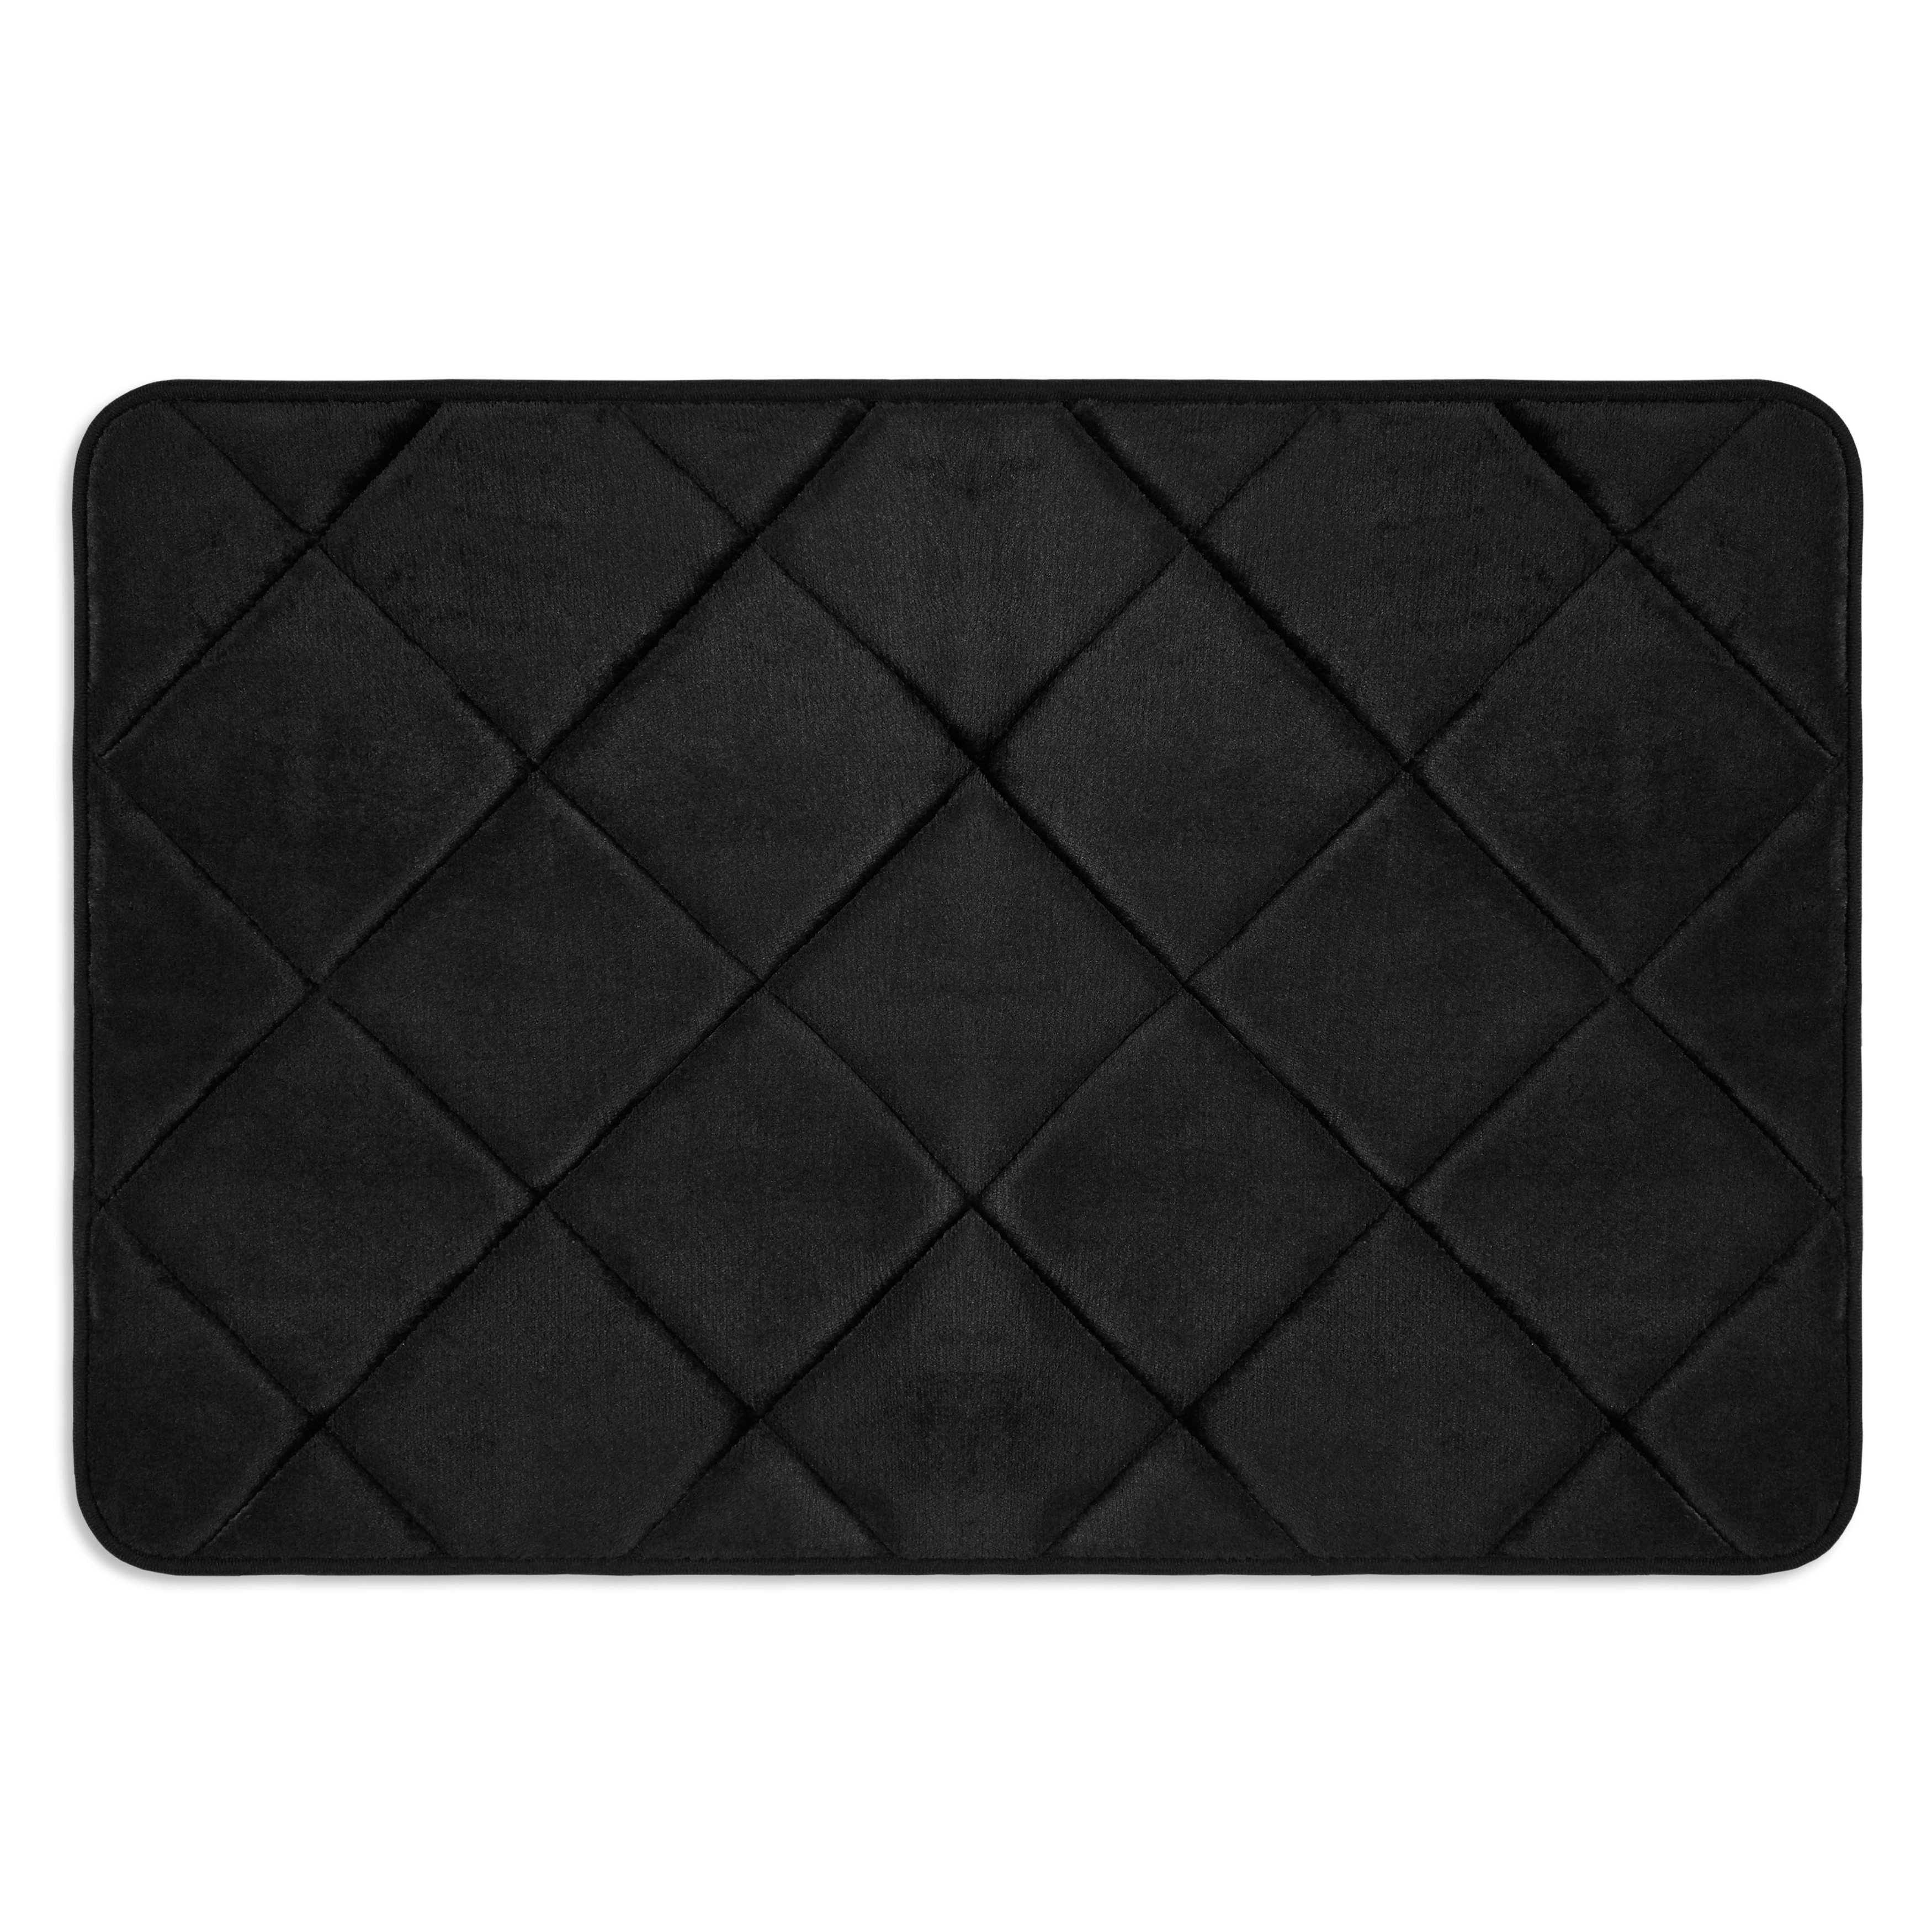 https://ak1.ostkcdn.com/images/products/is/images/direct/37670914be118c3cabf25a36aa0dd0da02f1a4ef/Home-Dynamix-Capri-Haven-Traditional-Bath-Mat.jpg